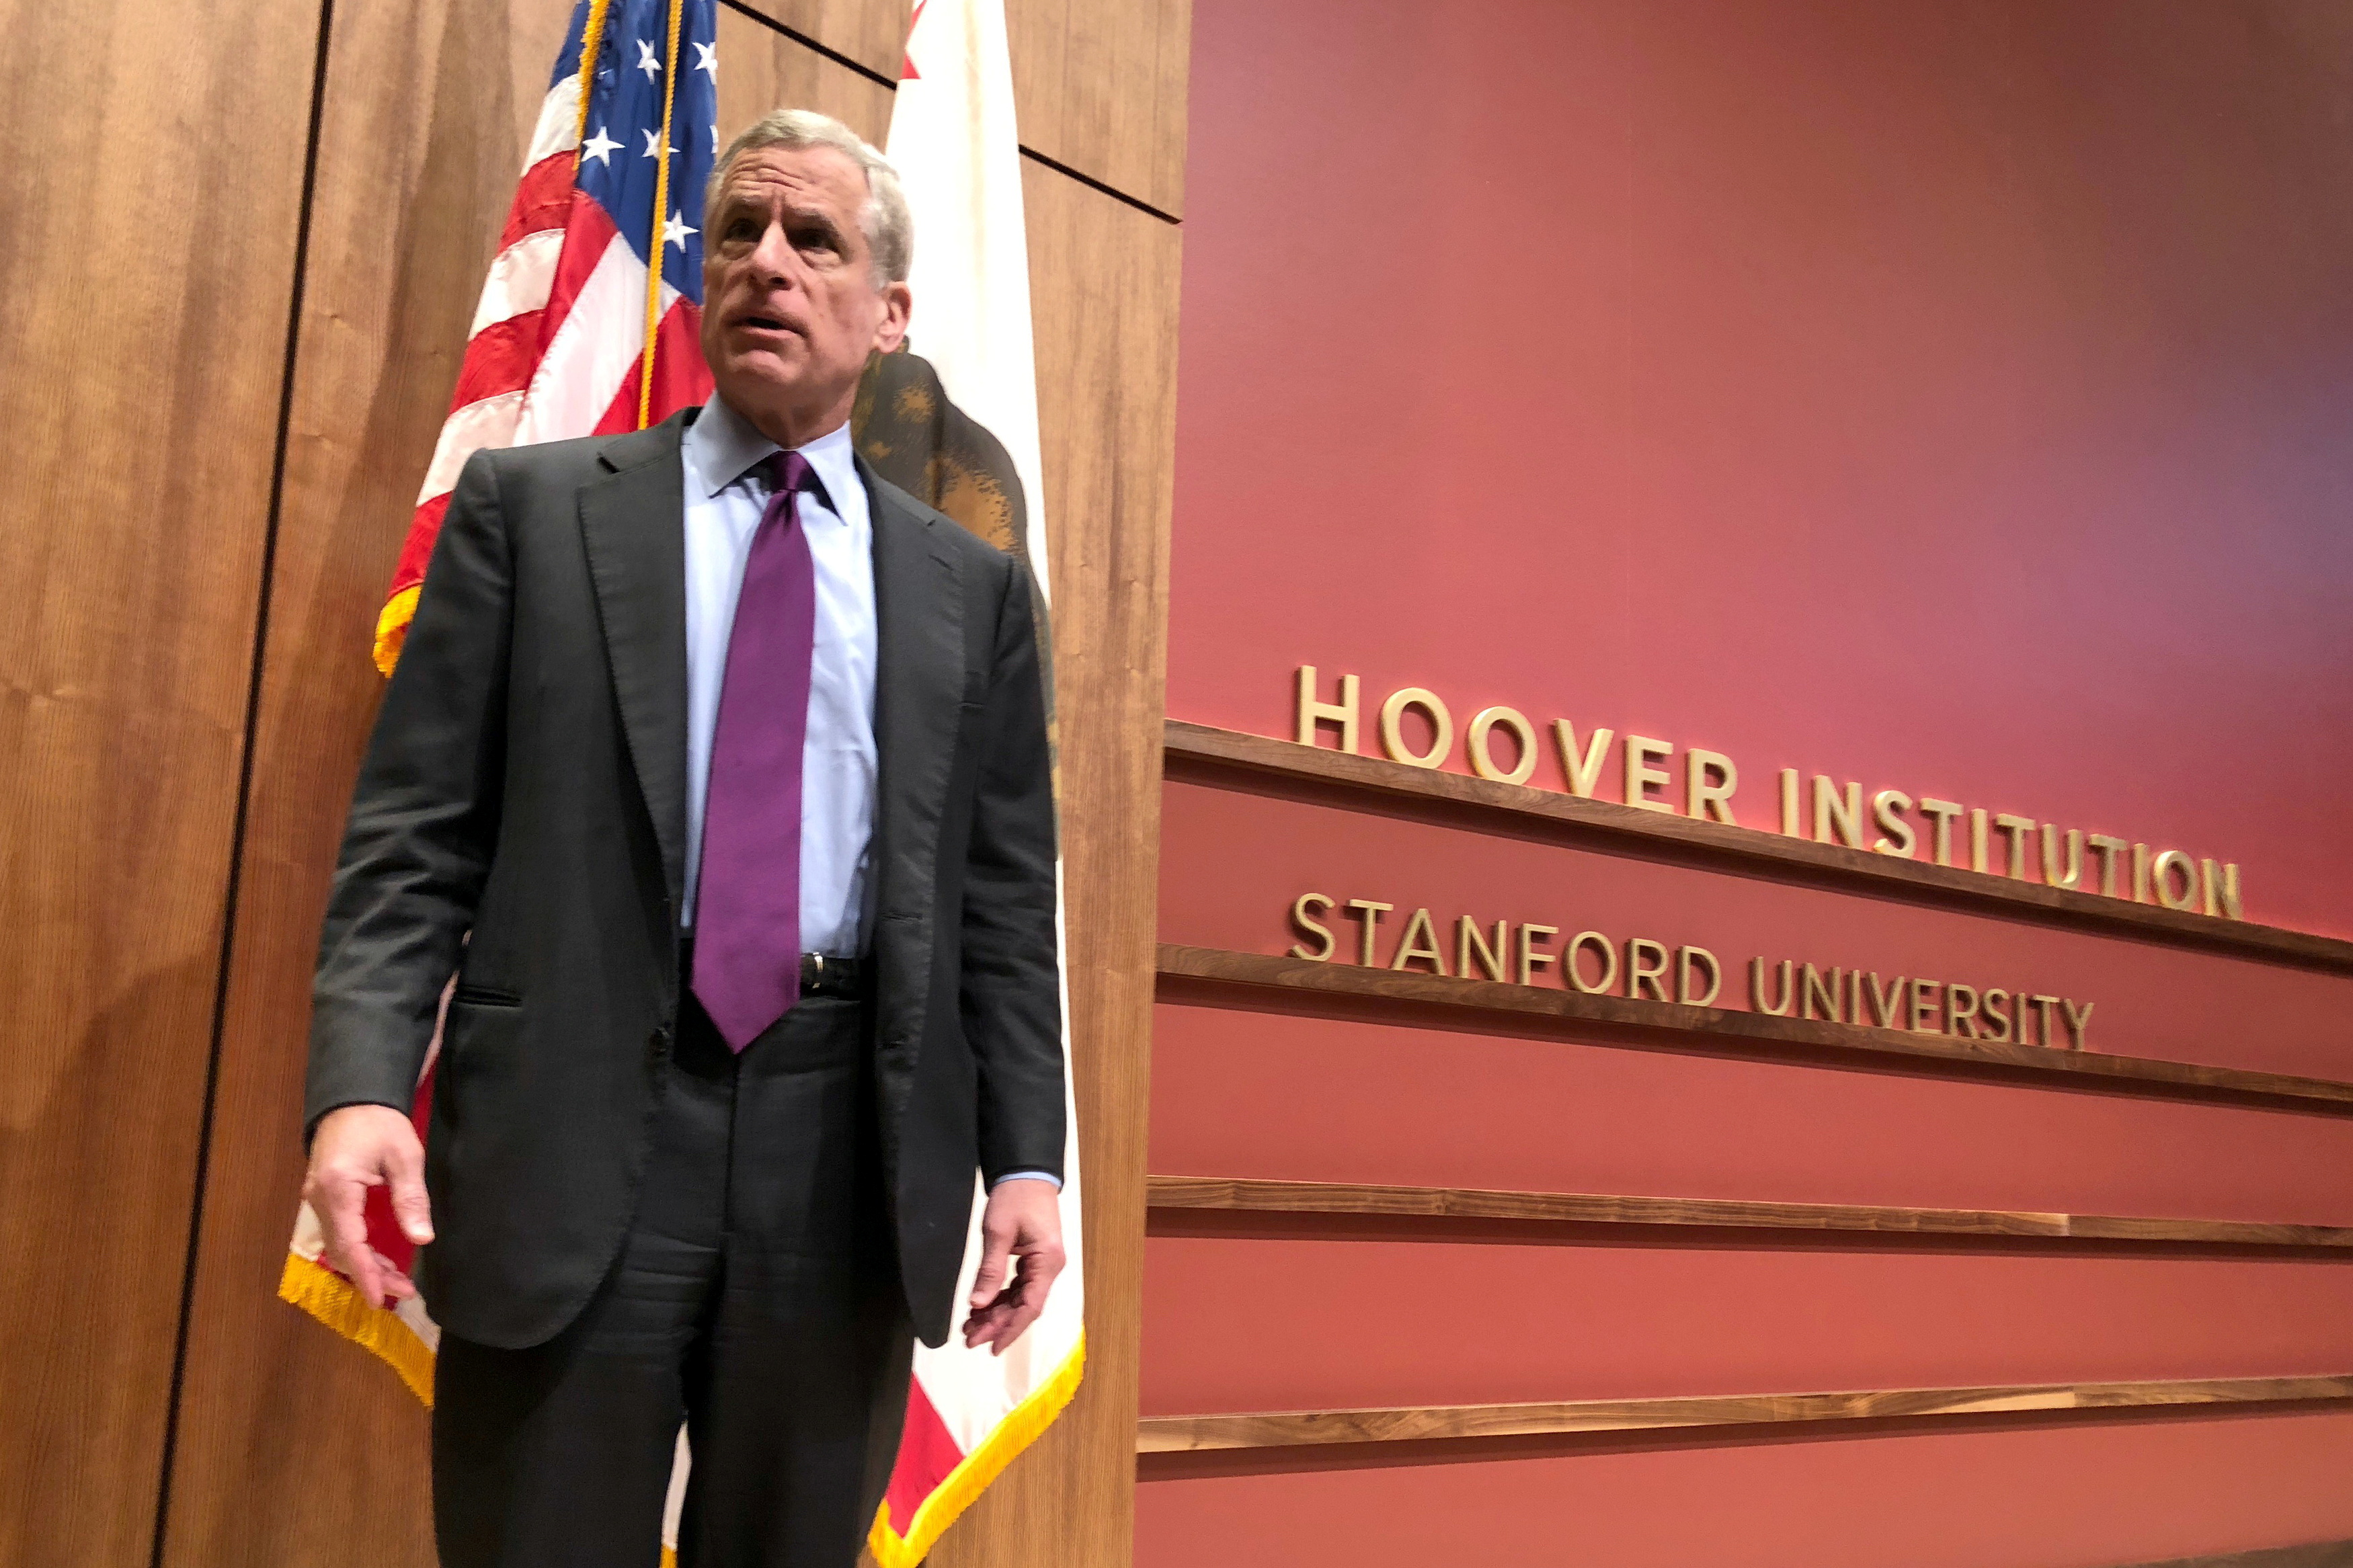 Dallas Federal Reserve Bank President Kaplan stands on a stage in Stanford